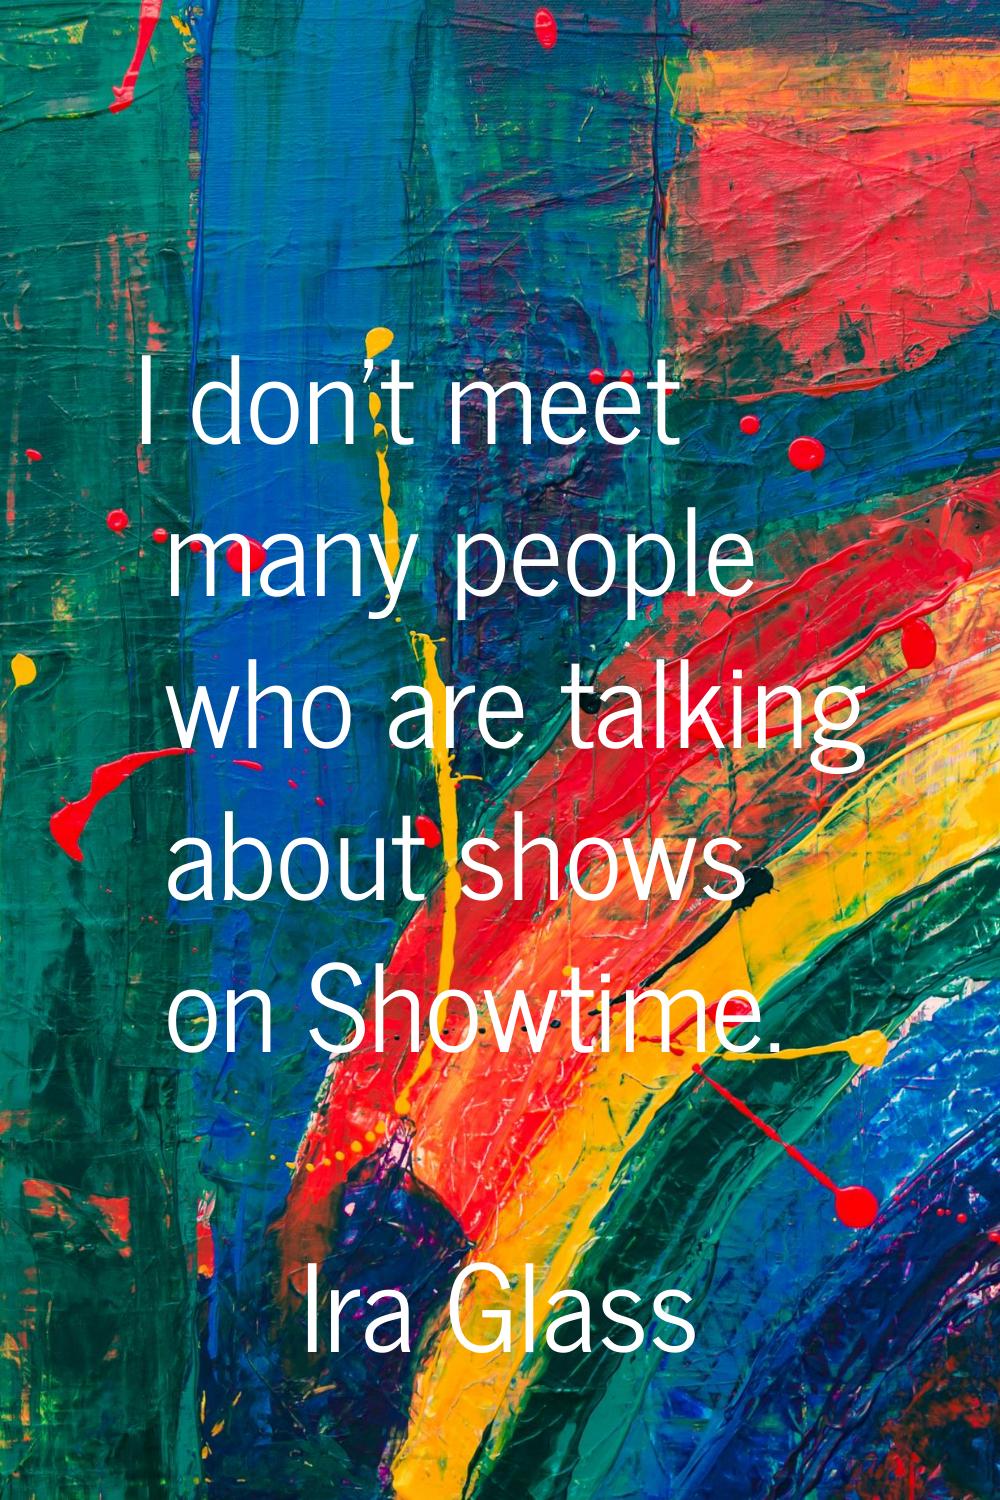 I don't meet many people who are talking about shows on Showtime.